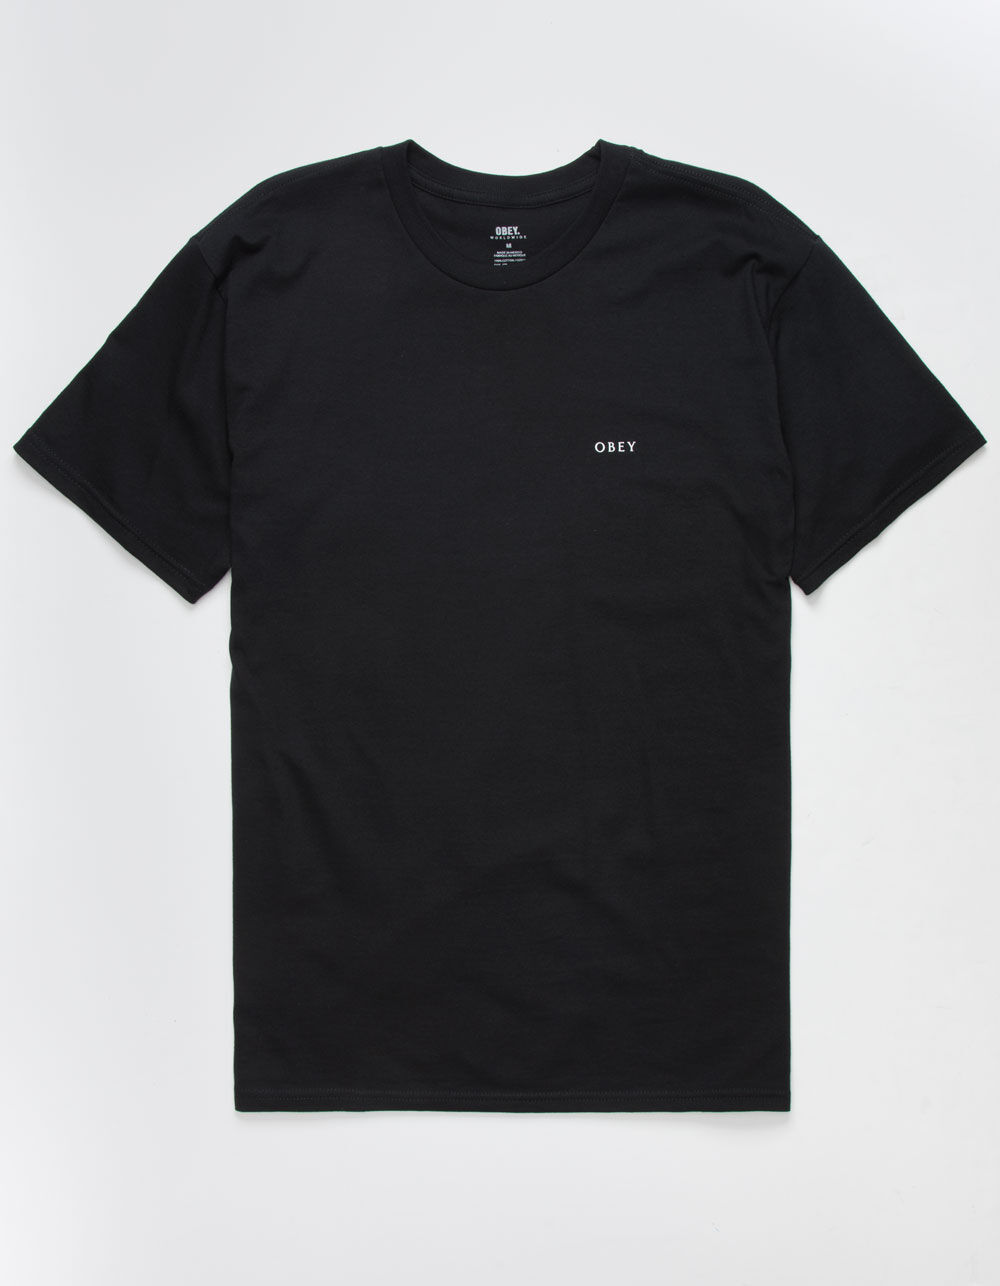 OBEY Give The Planet Mens Black T-Shirt image number 1